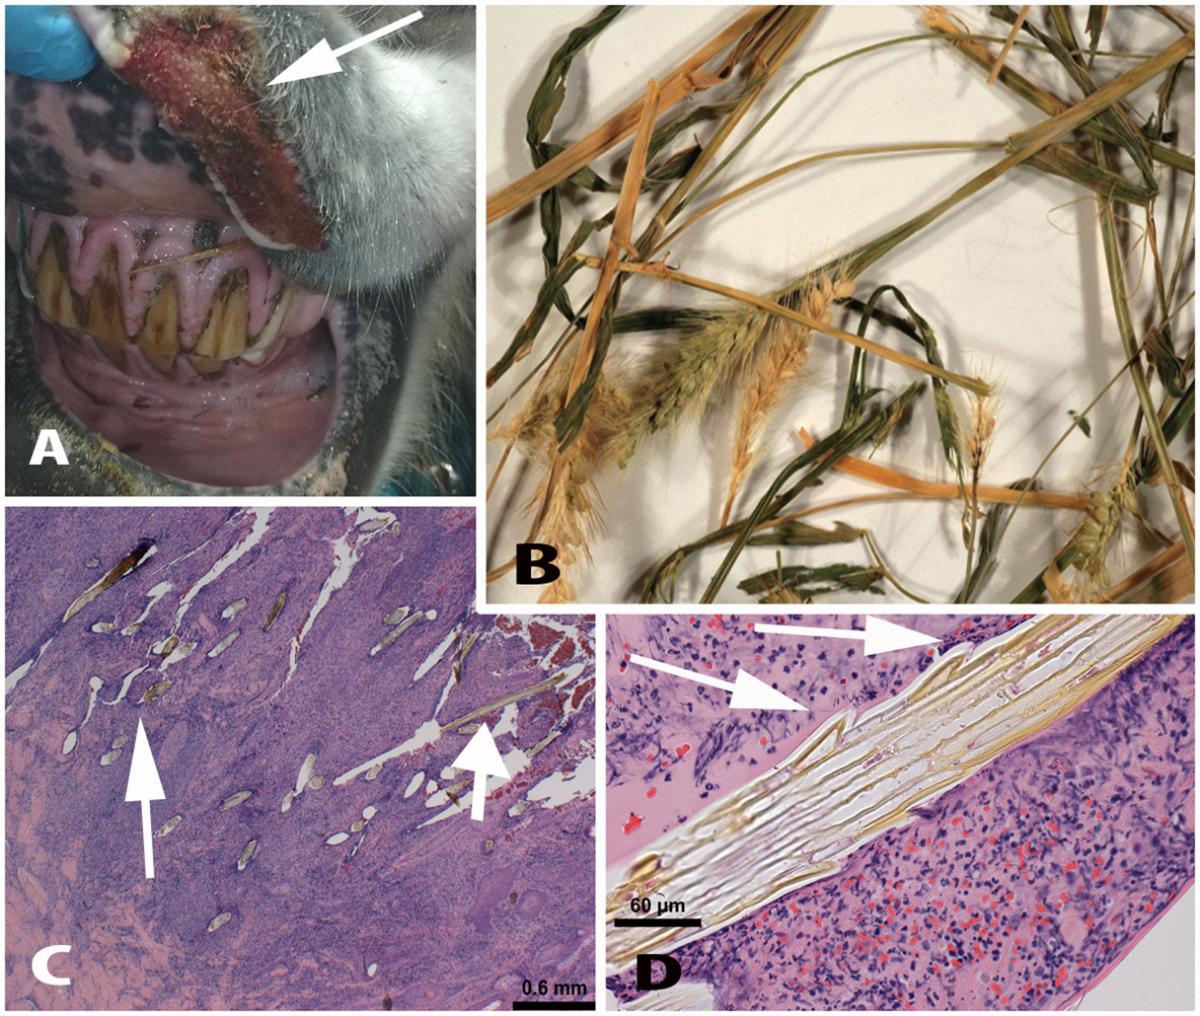 Figure 1. A. Lesion on the upper lip (arrow). B. Appearance of foxtail seed heads in mixed alfalfa-grass hay (from reference 2, reprinted with permission, courtesy of Dr PF Johnson and Equine Vet Educ). C. Low-power H&E of the biopsy, showing large number of awns in the inflamed lesion (arrows). D. Close-up of an awn, showing the sharp barbs (arrows).